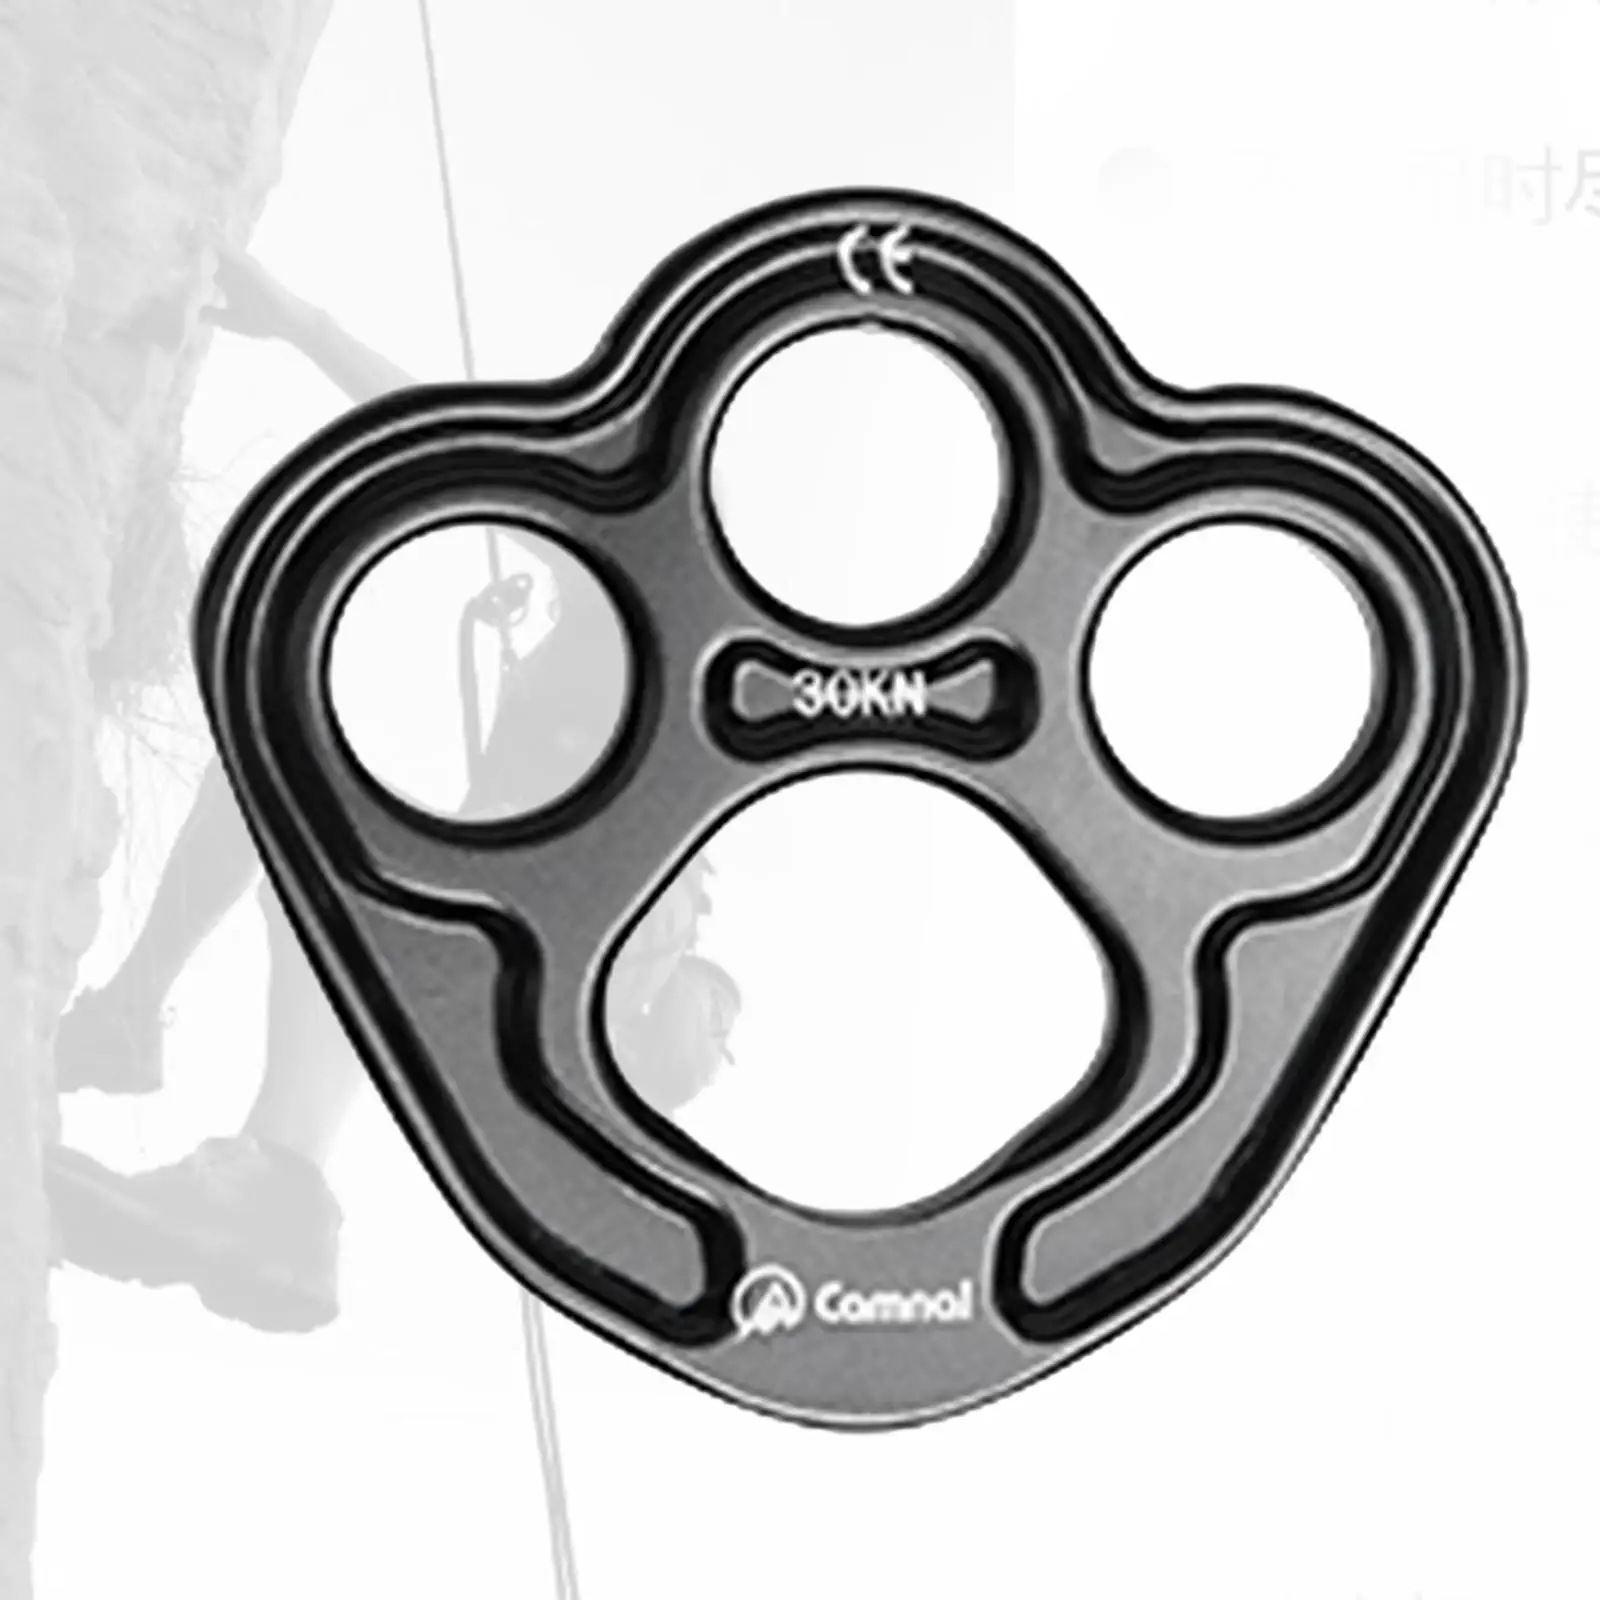 28KN Paw Rigging Plate Anchor Device for Climbing Dance Caving